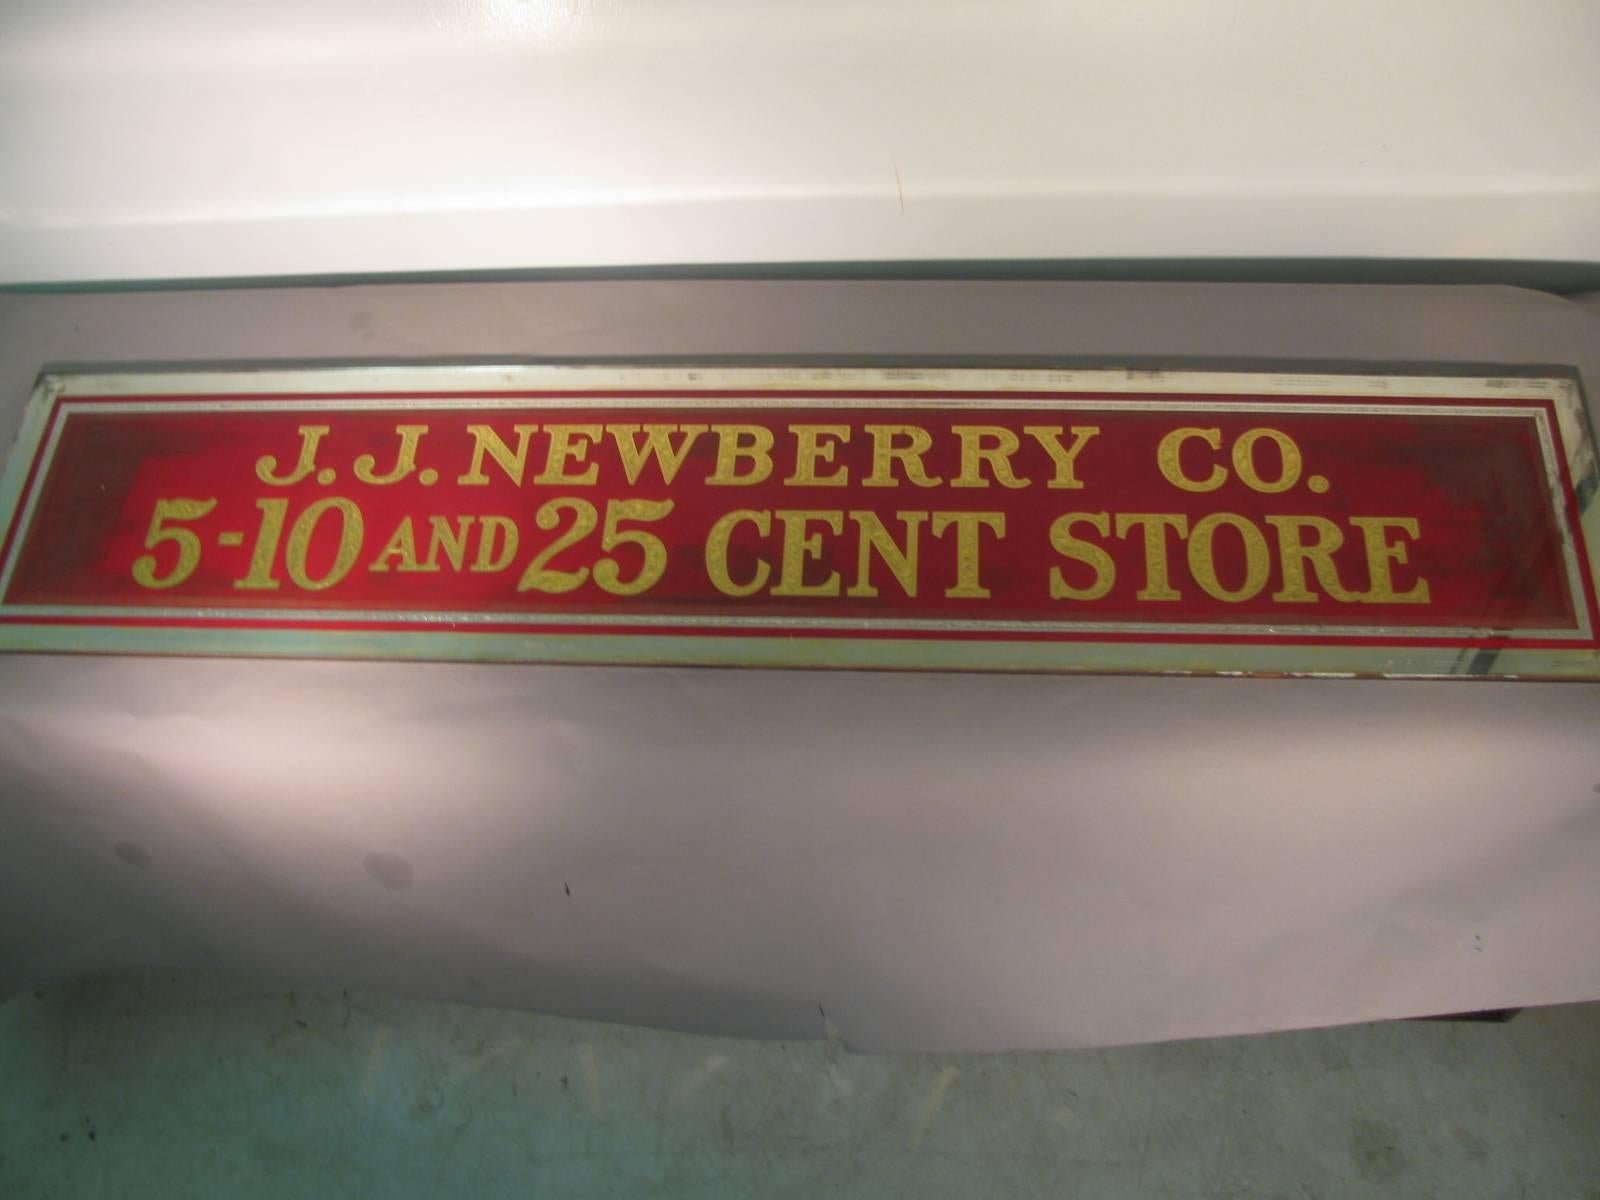 Fabulous double sided reverse painted with gilt lettering sign from a JJ Newberry store in my hometown of Port Jervis NY. Pair of signs available which were originally mounted over the doorways. Glass signs are in excellent condition. Some fading